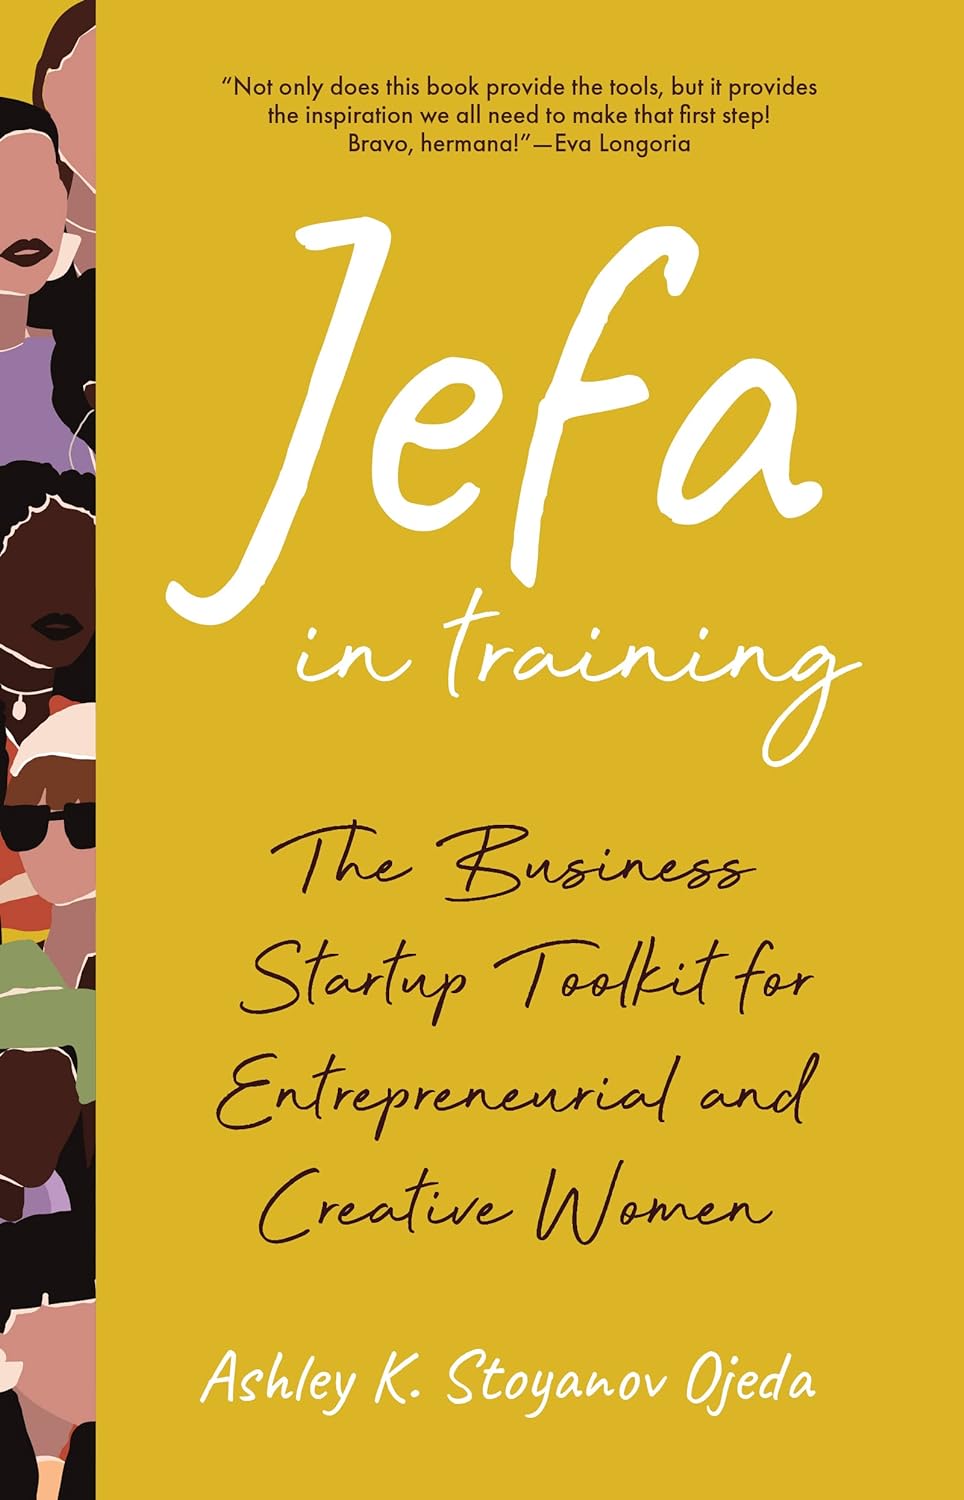 Jefa in Training: The Business Startup Toolkit for Entrepreneurial and Creative Women Paperback